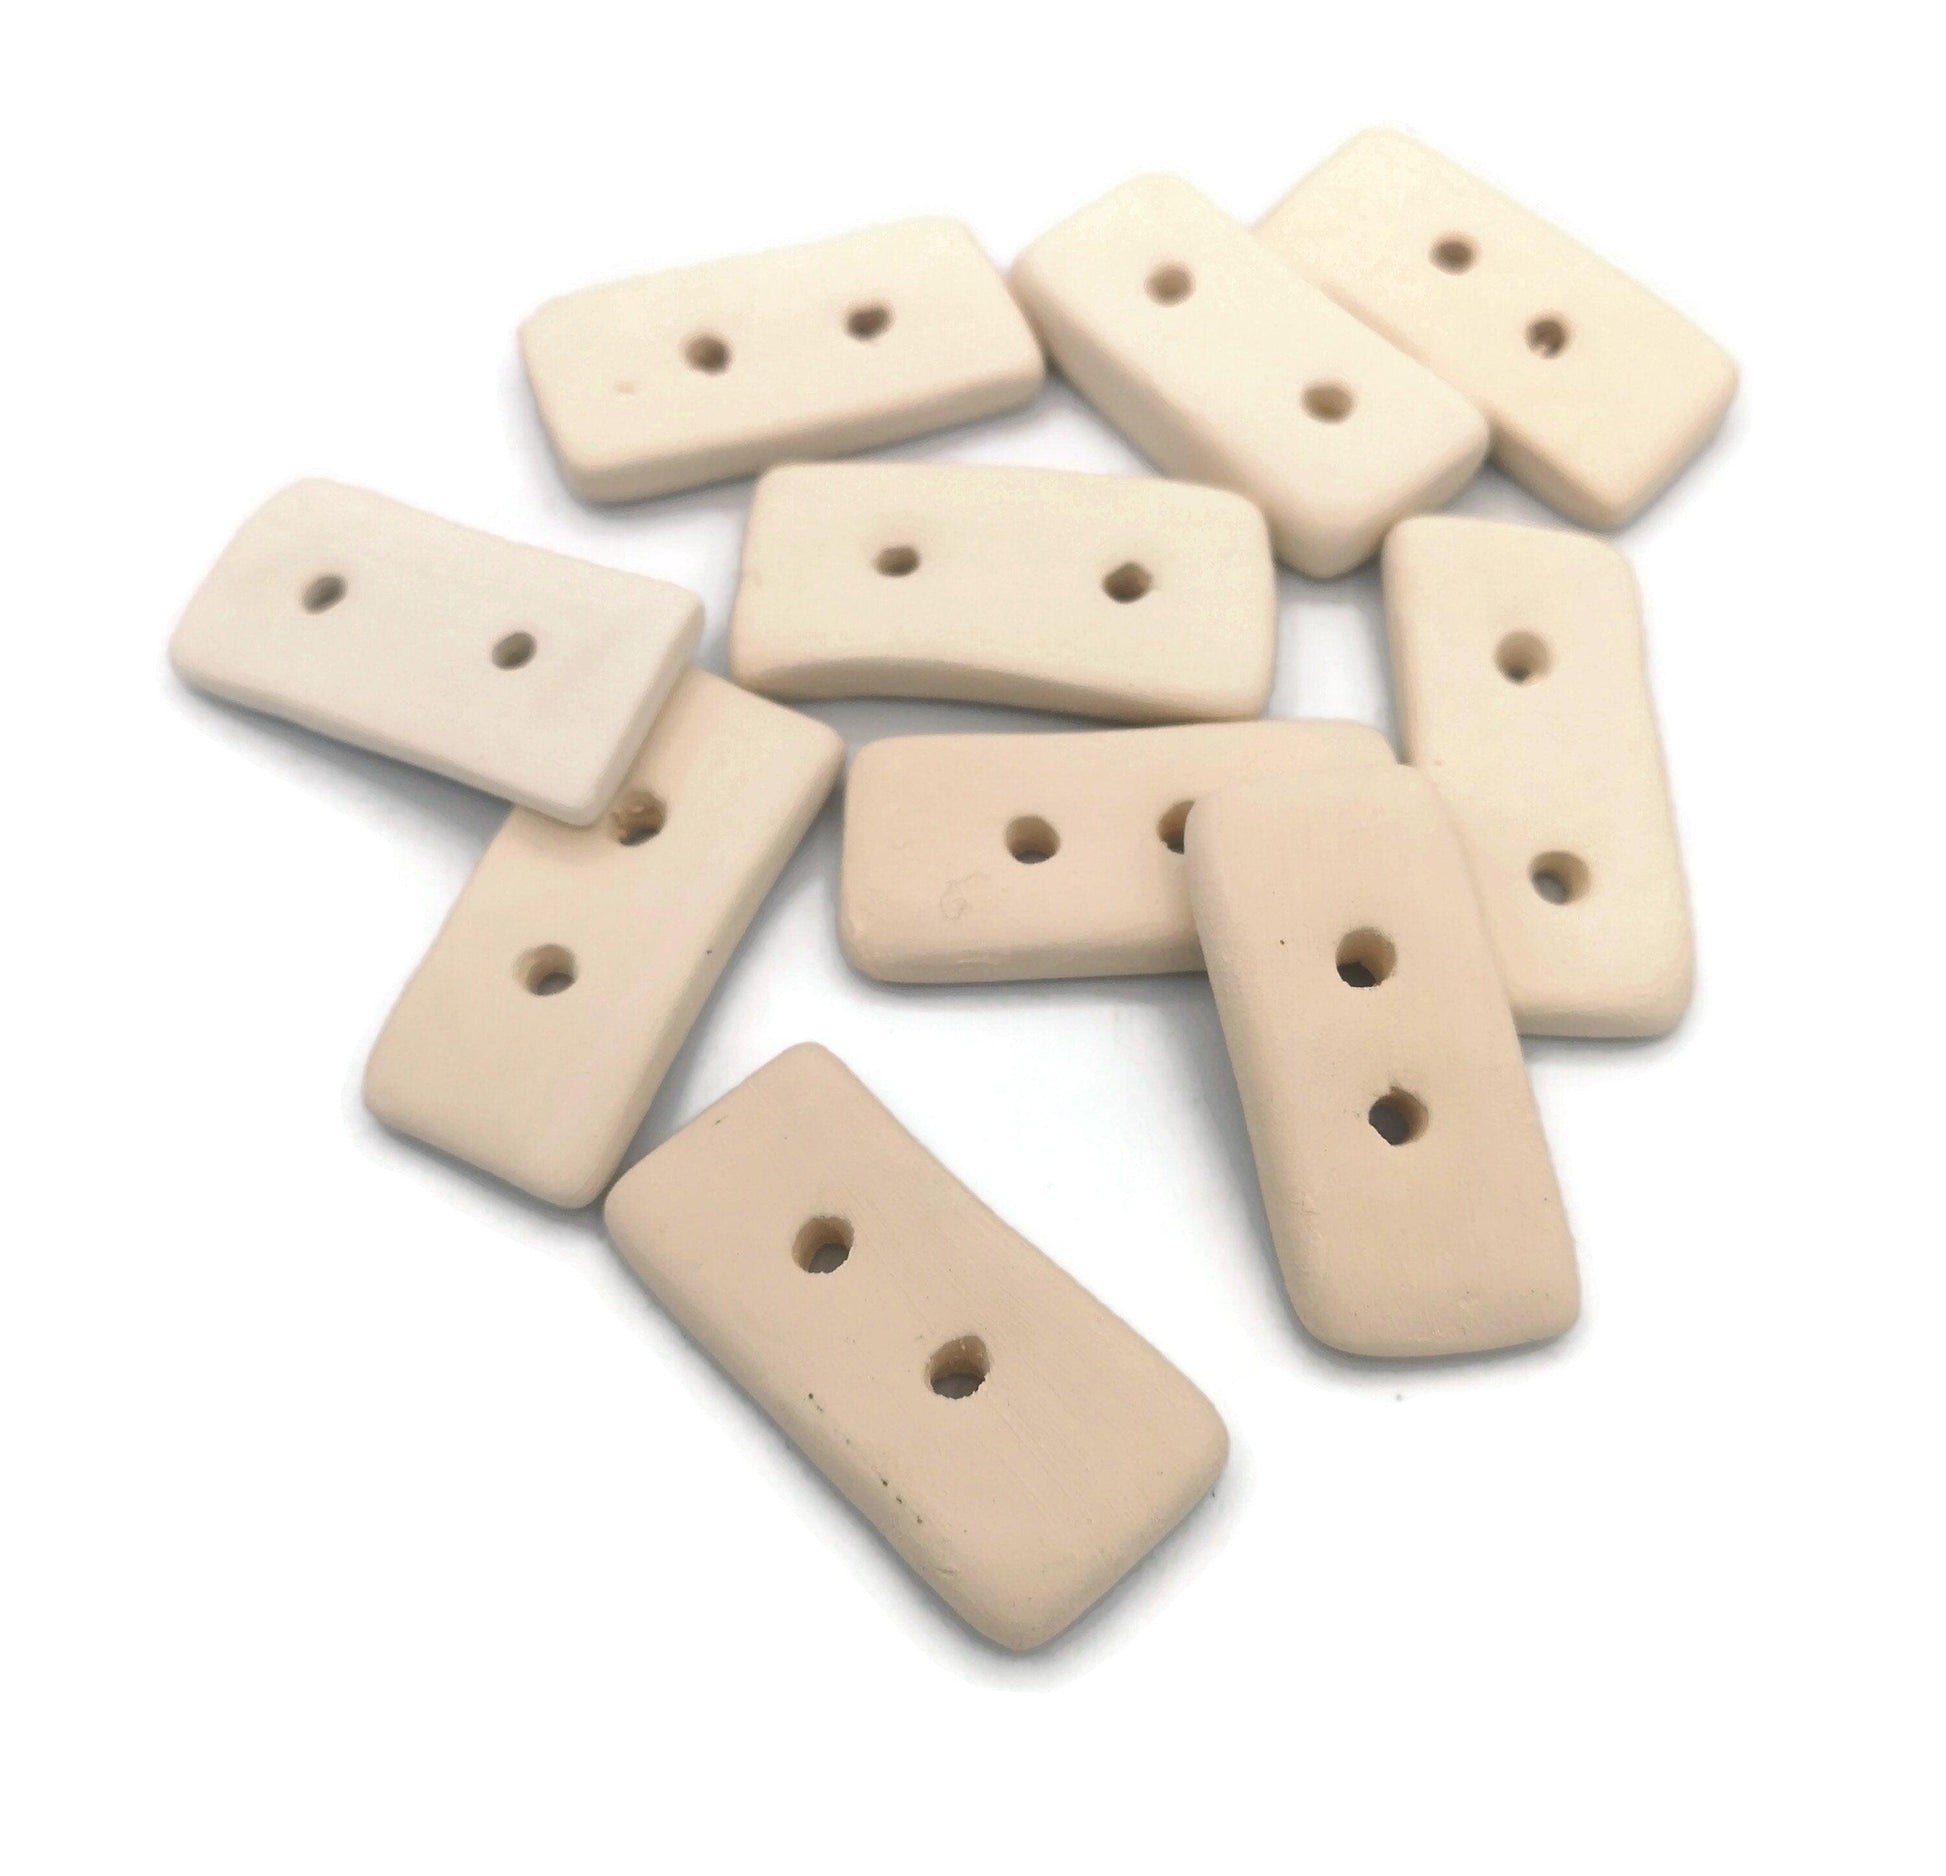 10Pcs Handmade Ceramic Bisque Buttons Ready To Paint, Artisan Blank Rectangle Shaped Sewing Buttons, Diy Craft Kit Gifts For Adults - Ceramica Ana Rafael